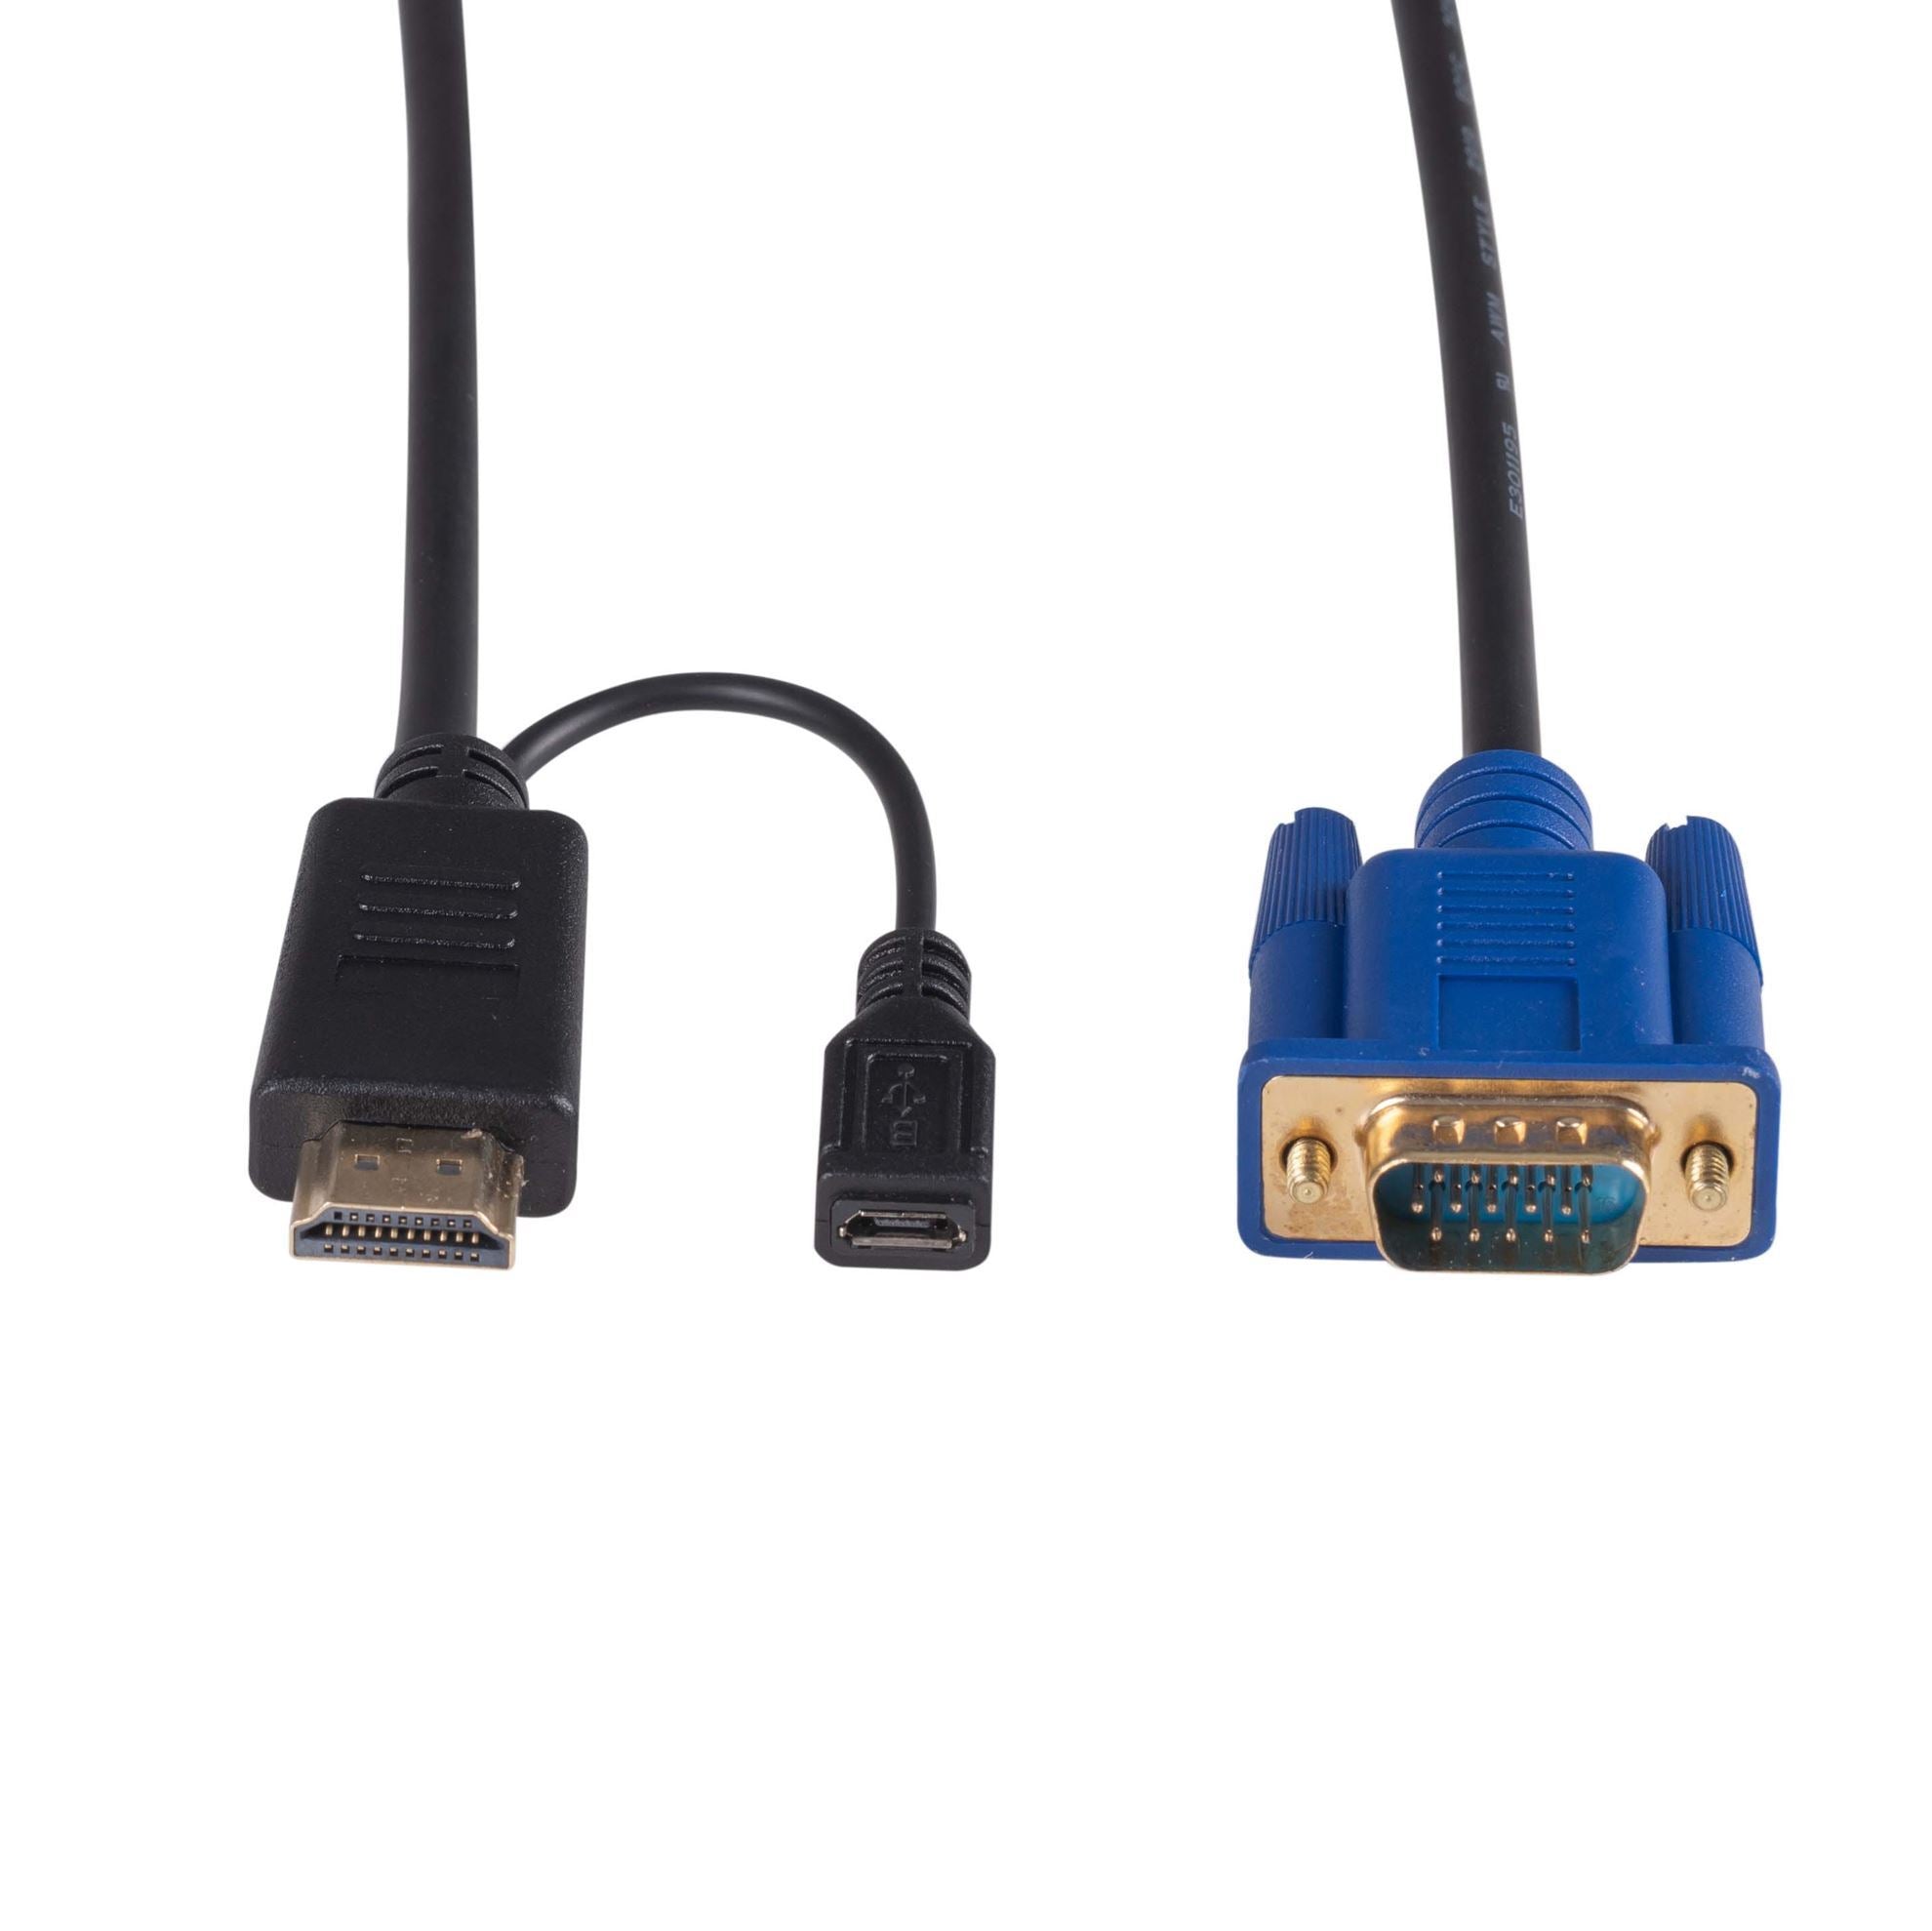 DYNAMIX_2m_HDMI_to_VGA_Cable,_Includes_Micro_USB_Female._Optional_Power._No_HDCP._HDMI_1.4_Max_Res:_1080p@60Hz_(1920x1080)._Directional_cable. 904